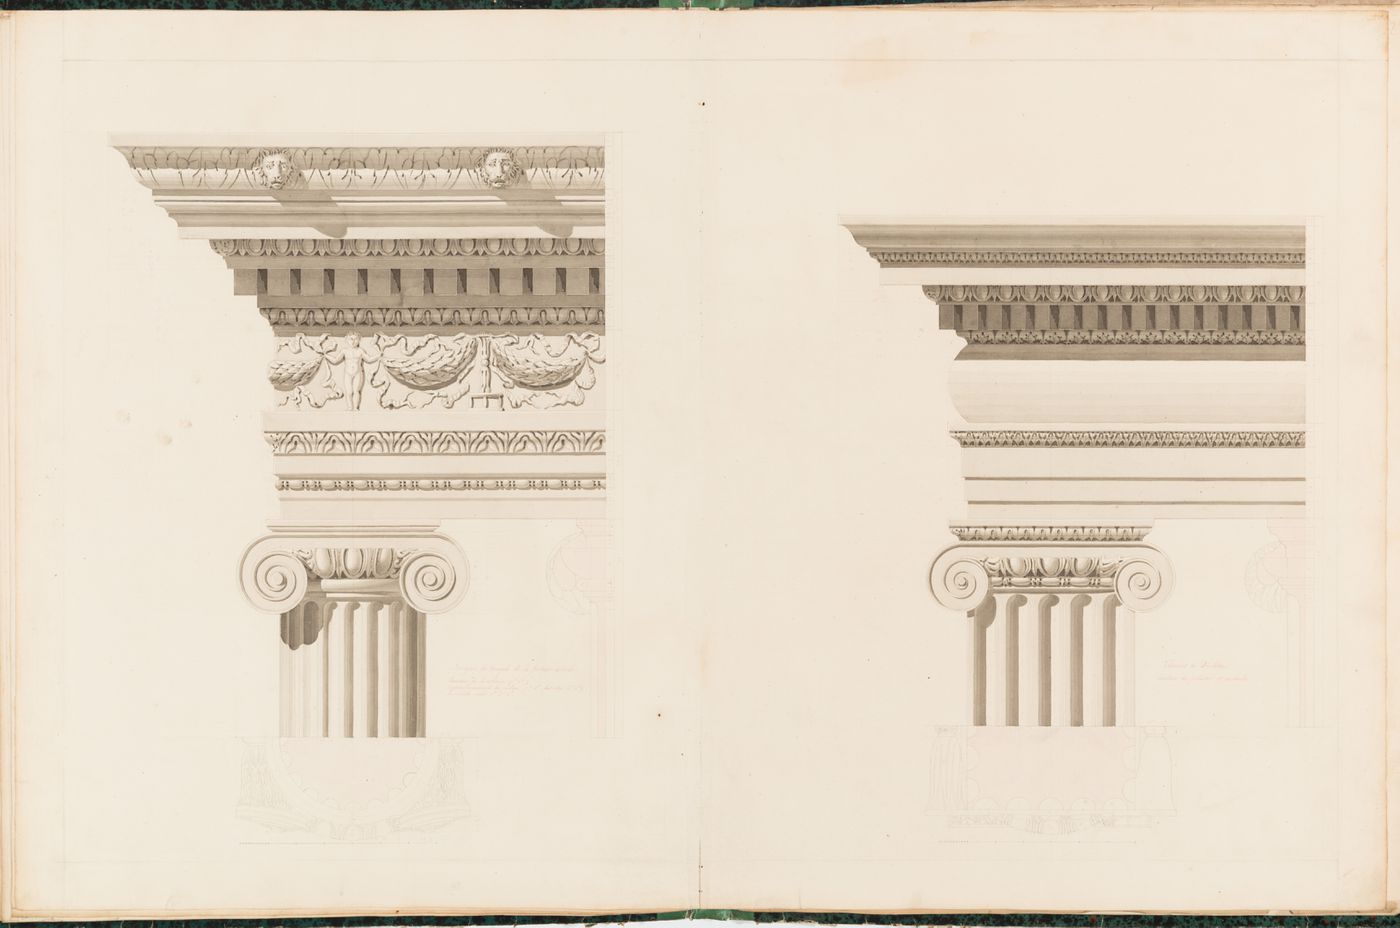 Elevations of shafts, capitals, and entablatures from two Ionic buildings, with plan and section details of the shafts and capitals: Temple of Fortuna Virilis and the Terme di Diocleziano, Rome